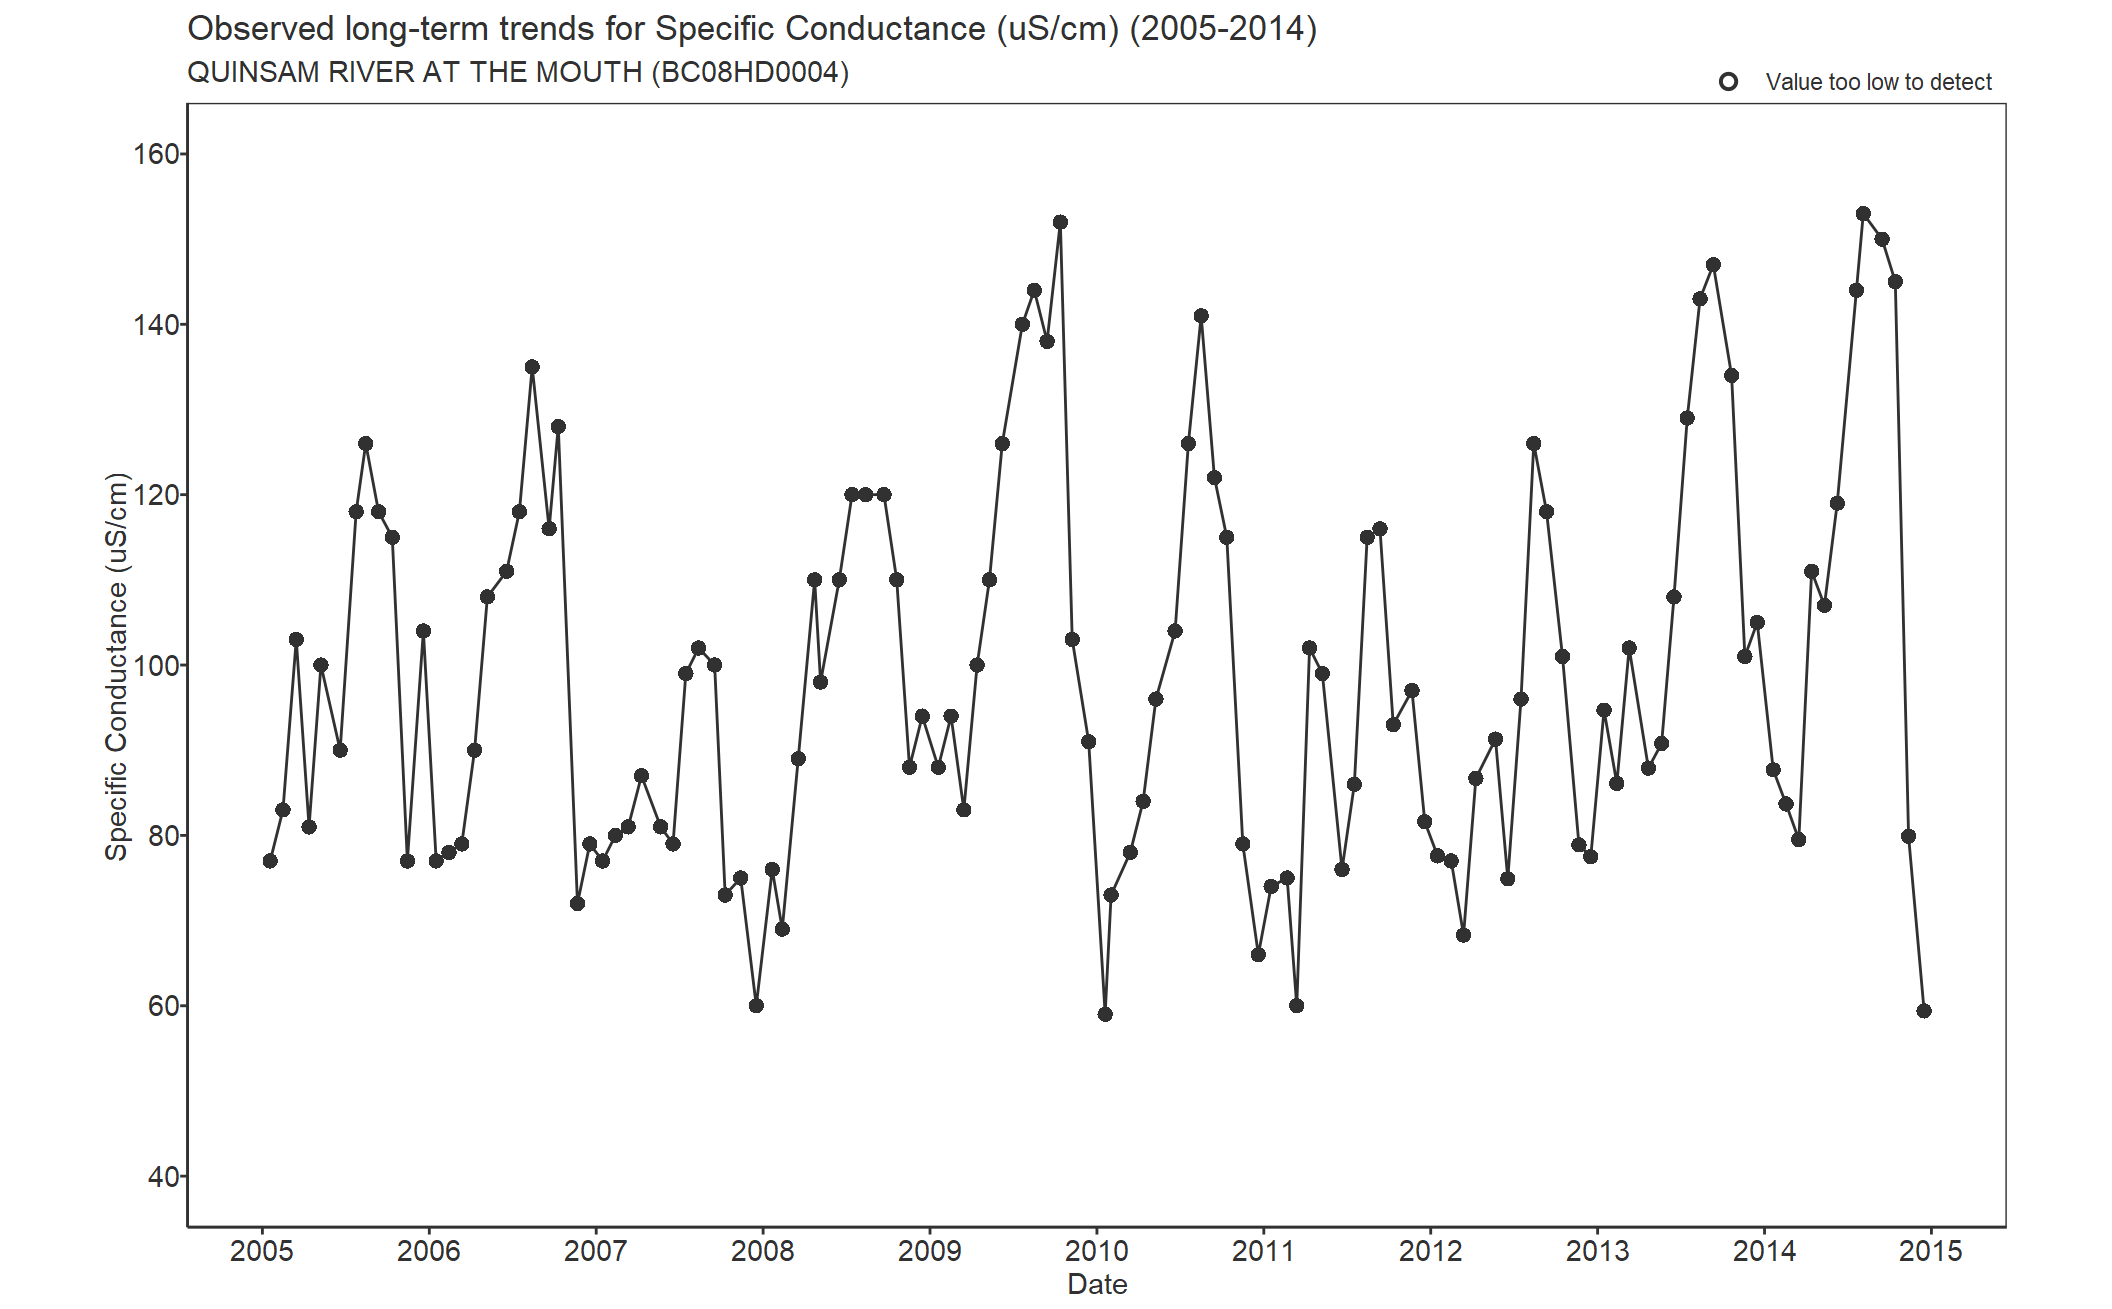 Observed long-term trends for Specific Conductance (2005-2014)